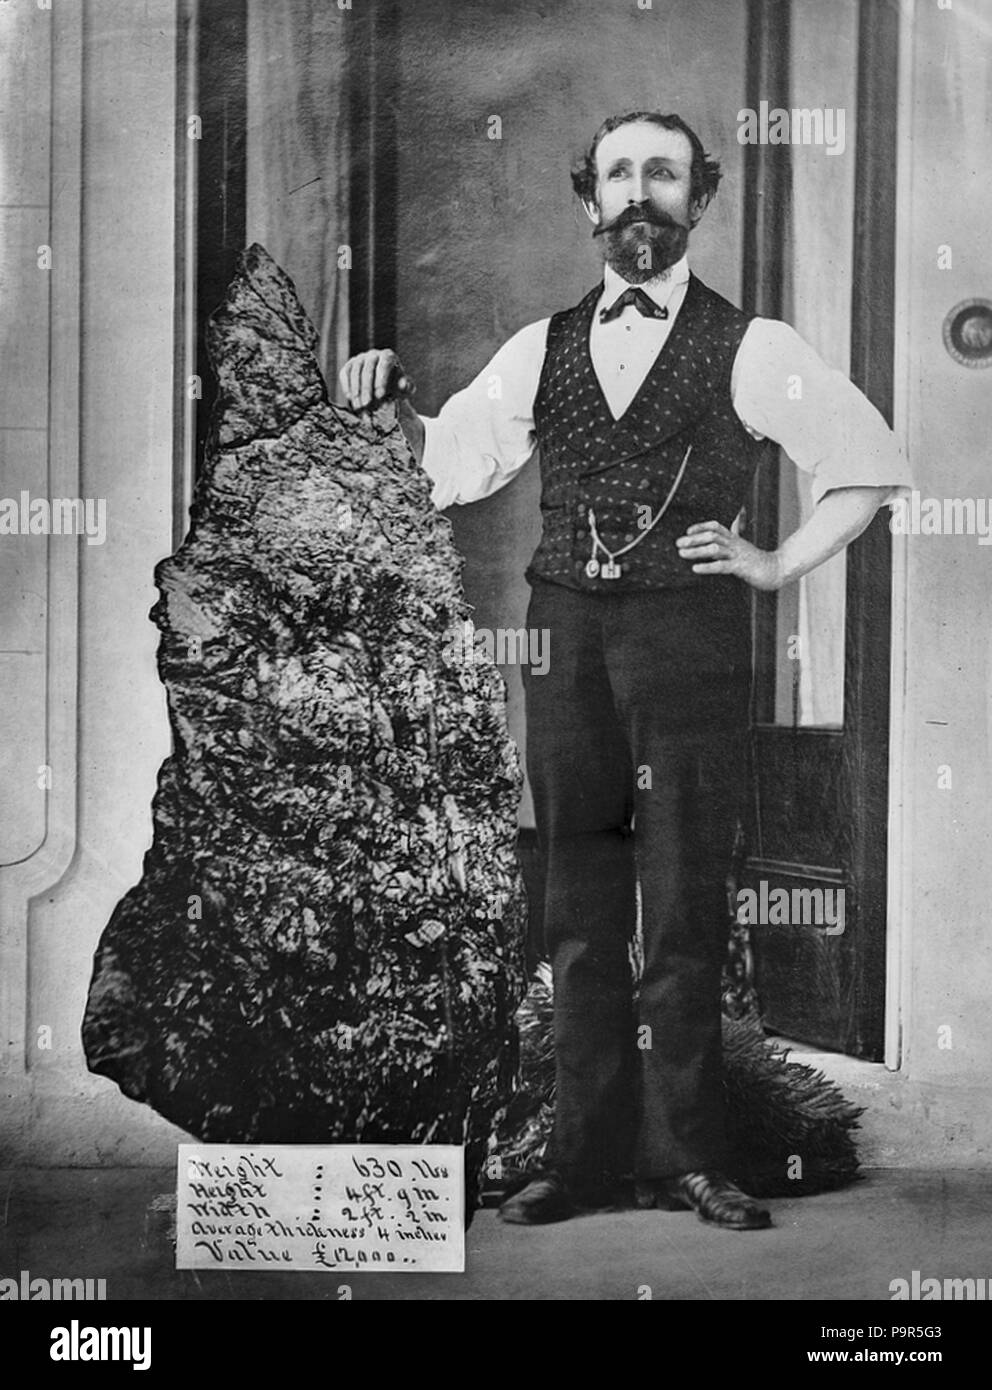 . English: Caption: 'Bernard Otto Holtermann and the world's largest 'nugget' of gold, North Sydney, ca. 1874-1876 / montage photograph by American and Australasian Photographic Company' The 'nugget' was found in Hill End, New South Wales by German prospector, Bernhard Otto Holtermannon 19th October 1872. More than half of the 630 lbs weight was pure gold, at that time having the value of 12,000 pounds ($24,000). Today, with gold worth say $1400 per ounce, the value today would be over $10 million. Three photographs were used to create this image of Holtermann, (supposedly holding the worlds'  Stock Photo